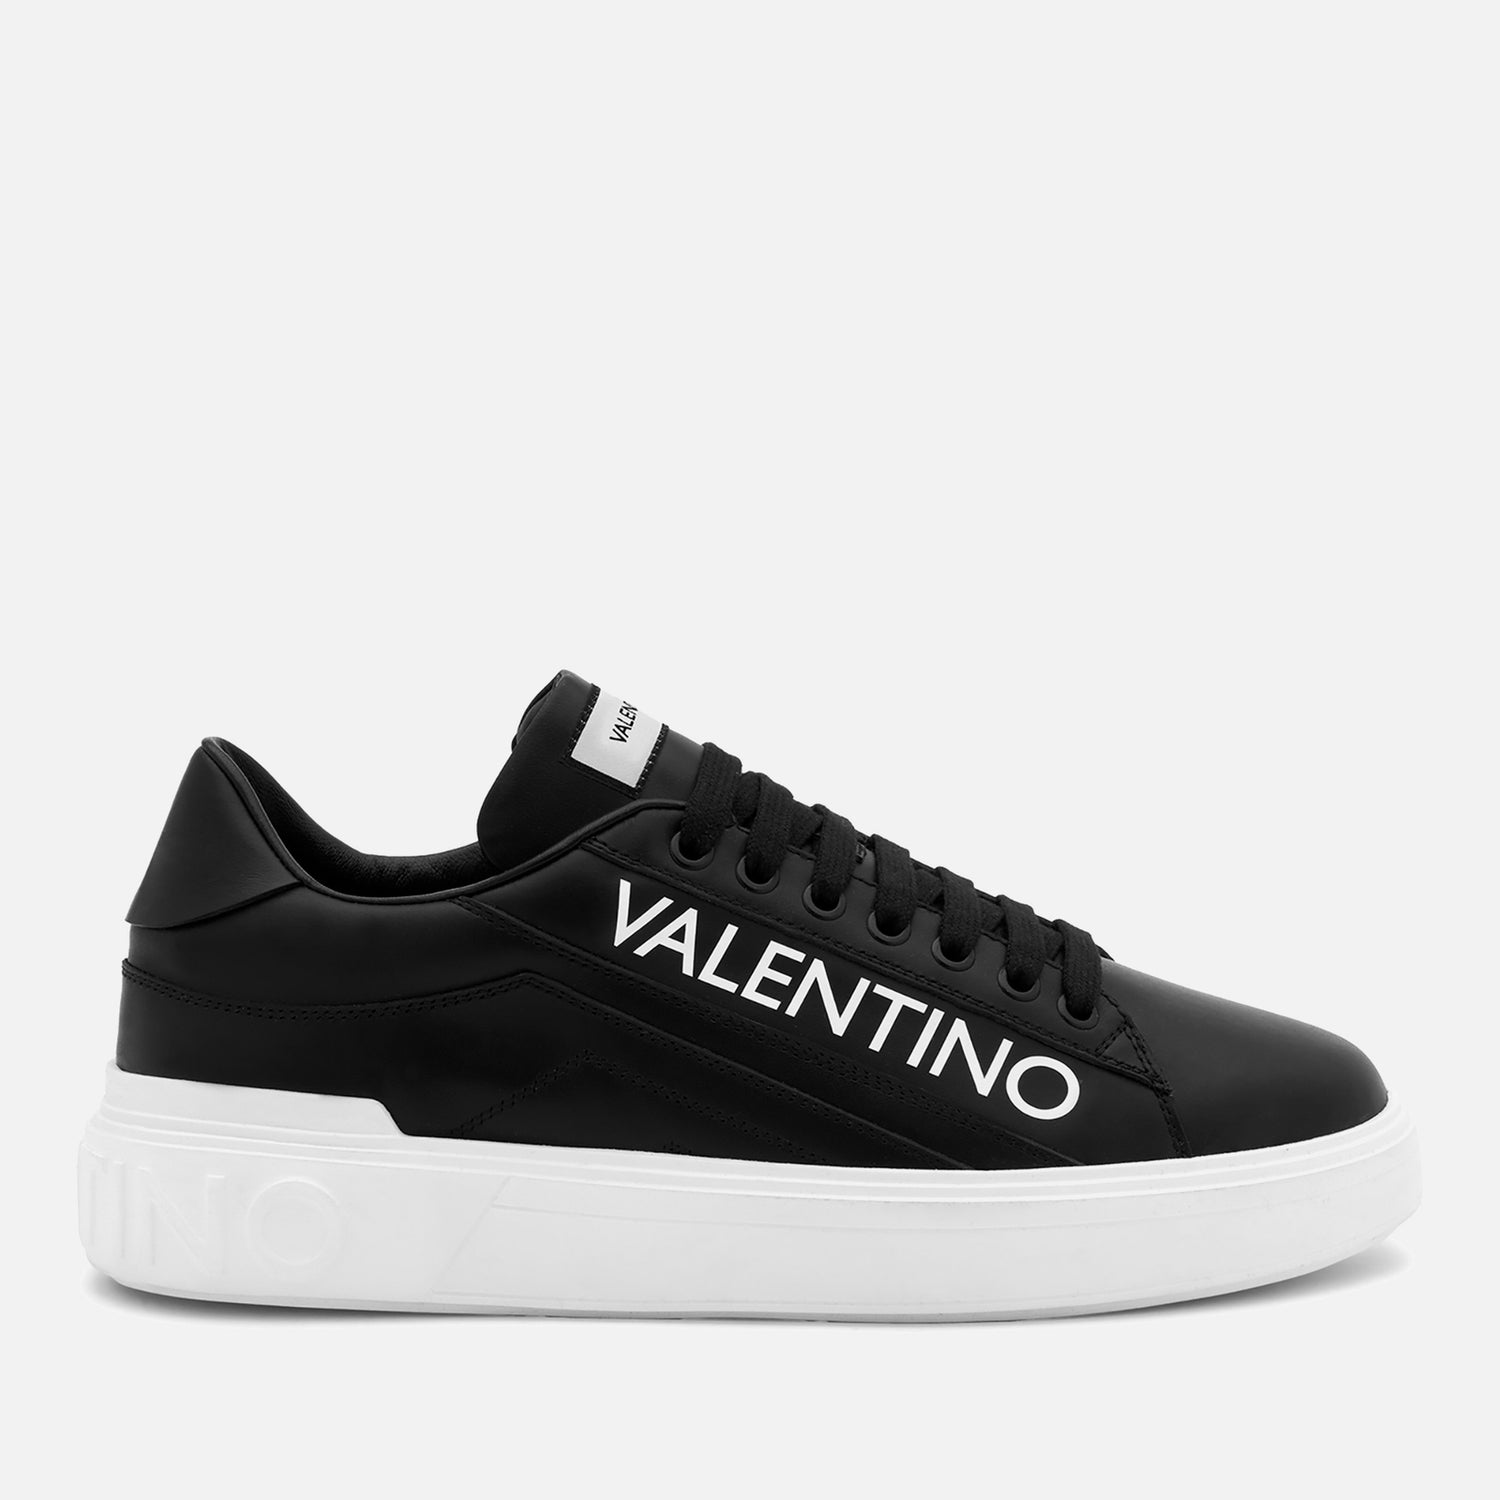 Valentino Men's Rey Leather Low Top Trainers - Black - 11